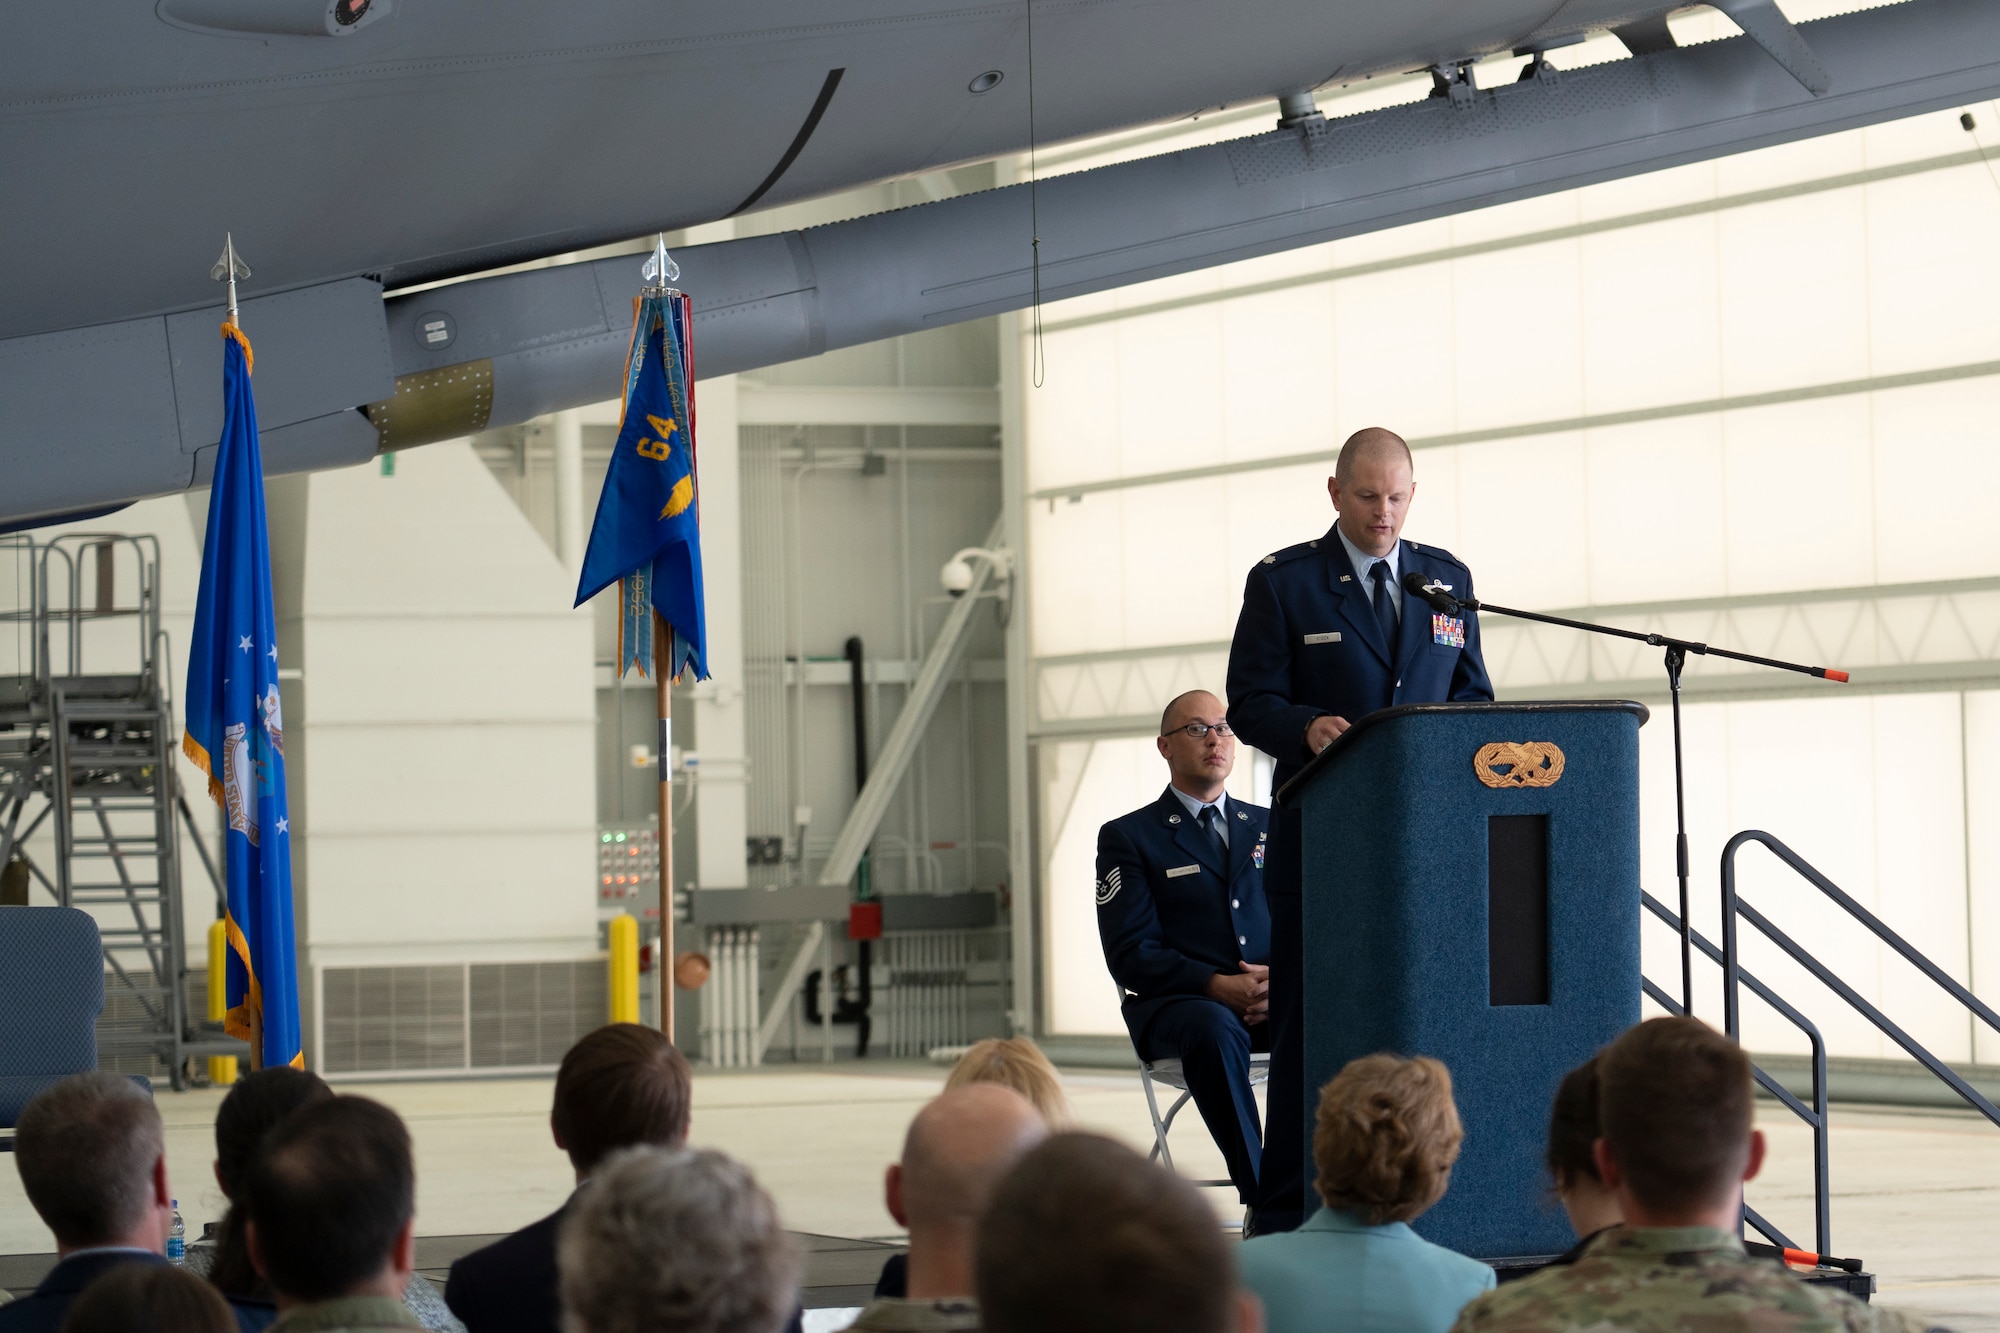 Lt. Col. Brandon Stock, incoming commander of the 64th Air Refueling Squadron, speaks to members of the New Hampshire congressional delegation, leadership from McConnell AFB, and Airmen from both units while on stage.